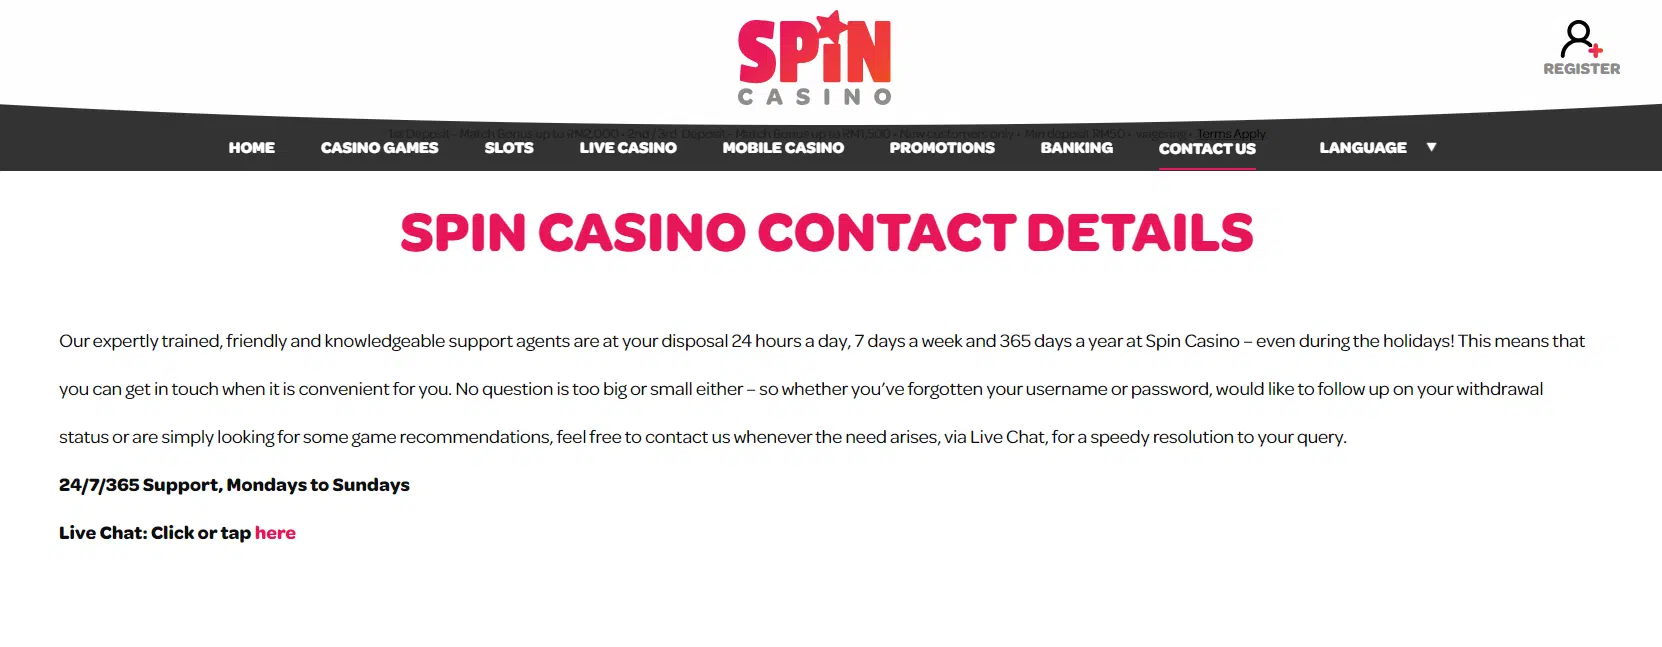 contact details for spin casino support